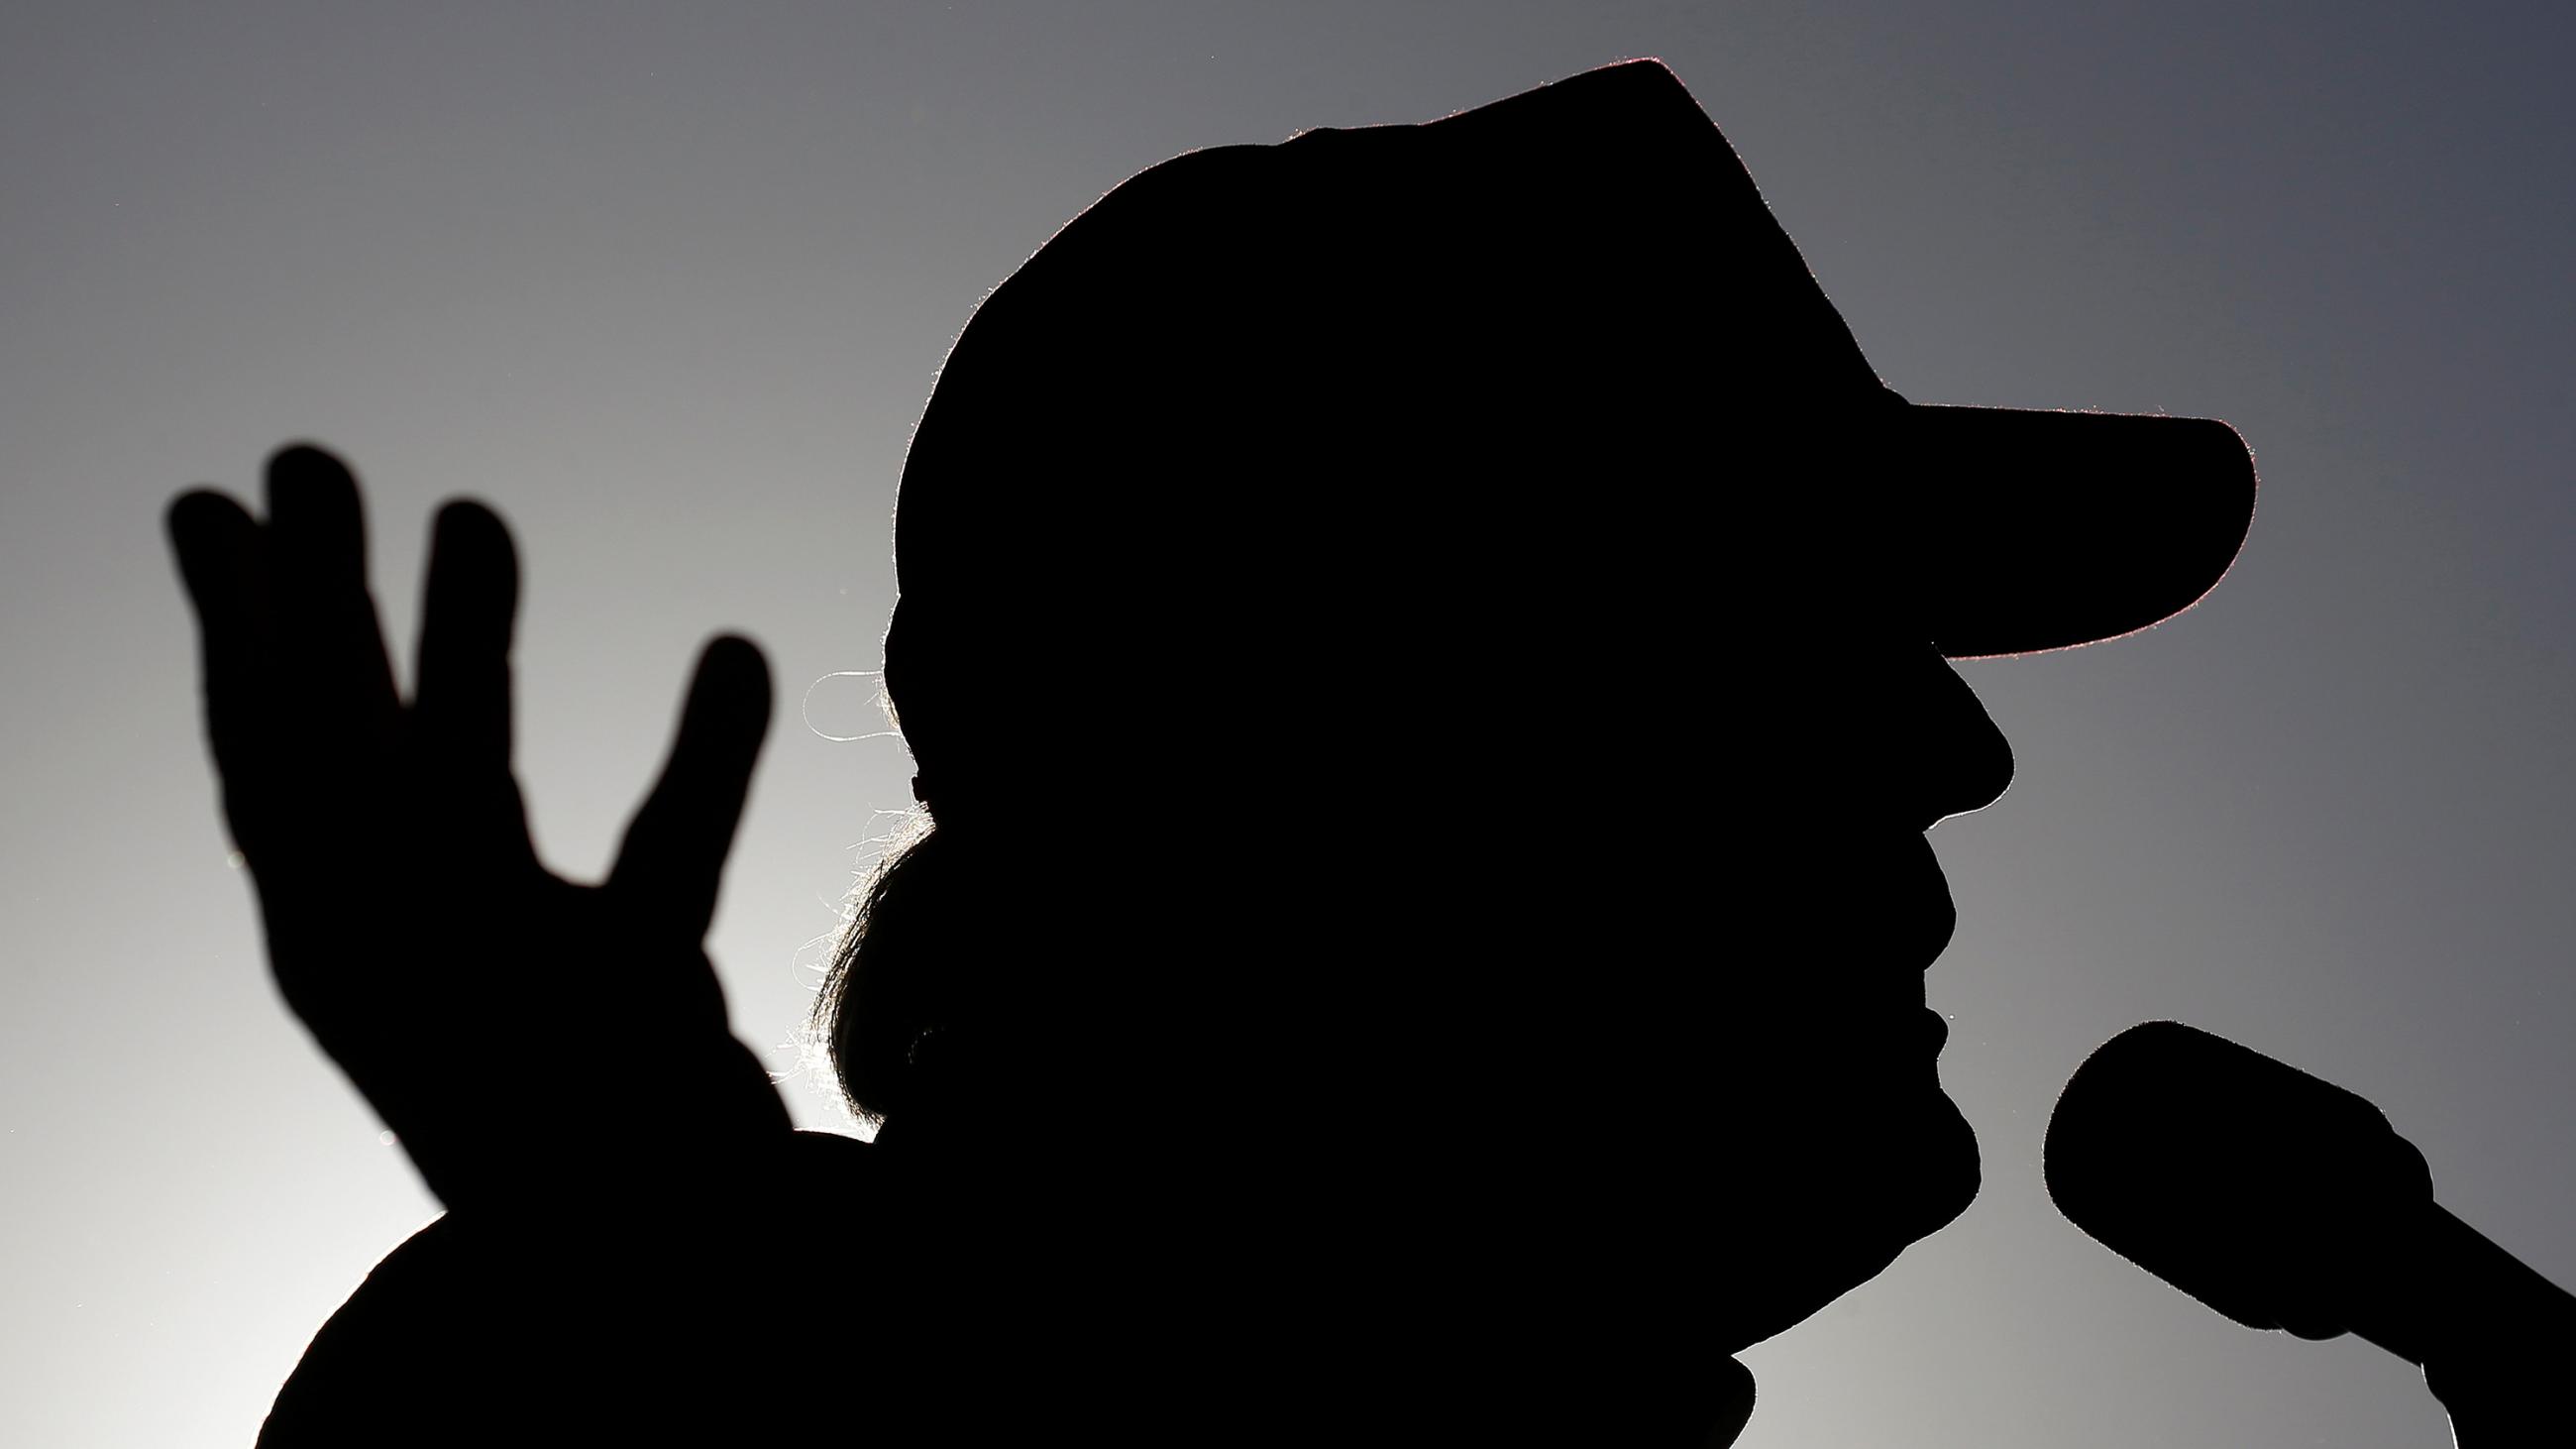 The photo shows a silhouette of the candidate speaking. he is wearing a hat and gesturing with his hand. 